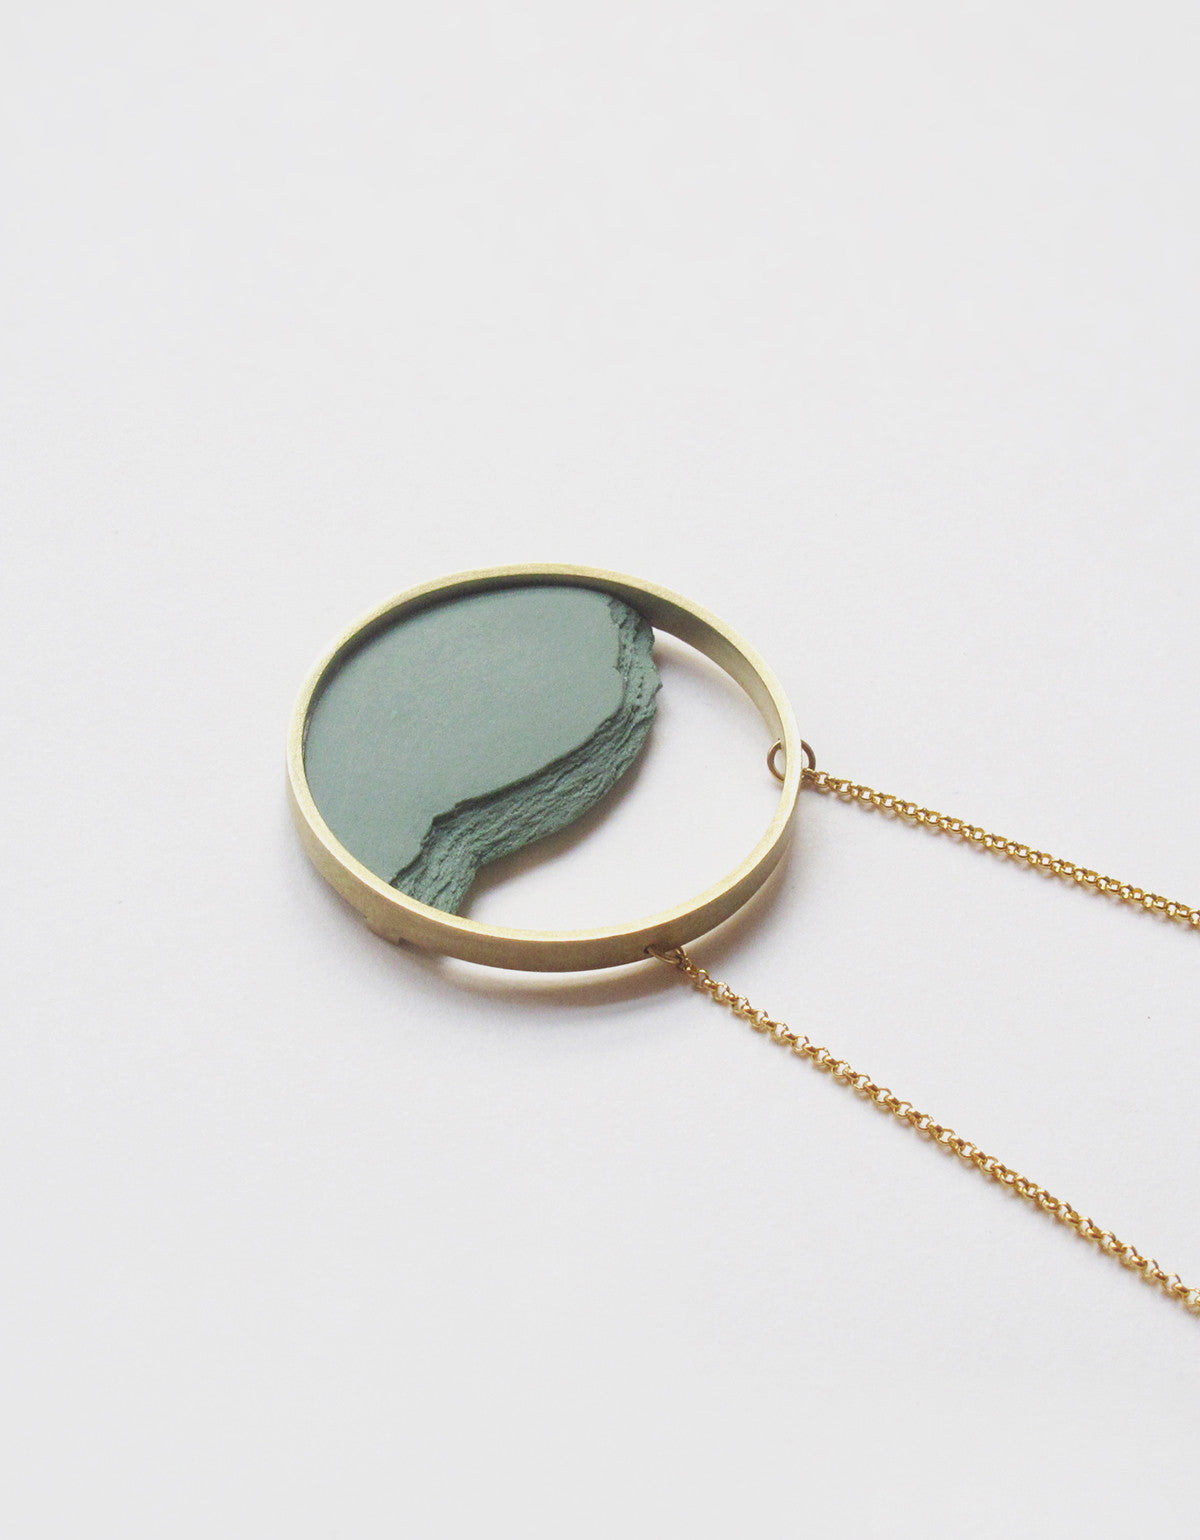 DSNU Gold Circle Frame Necklace, Green